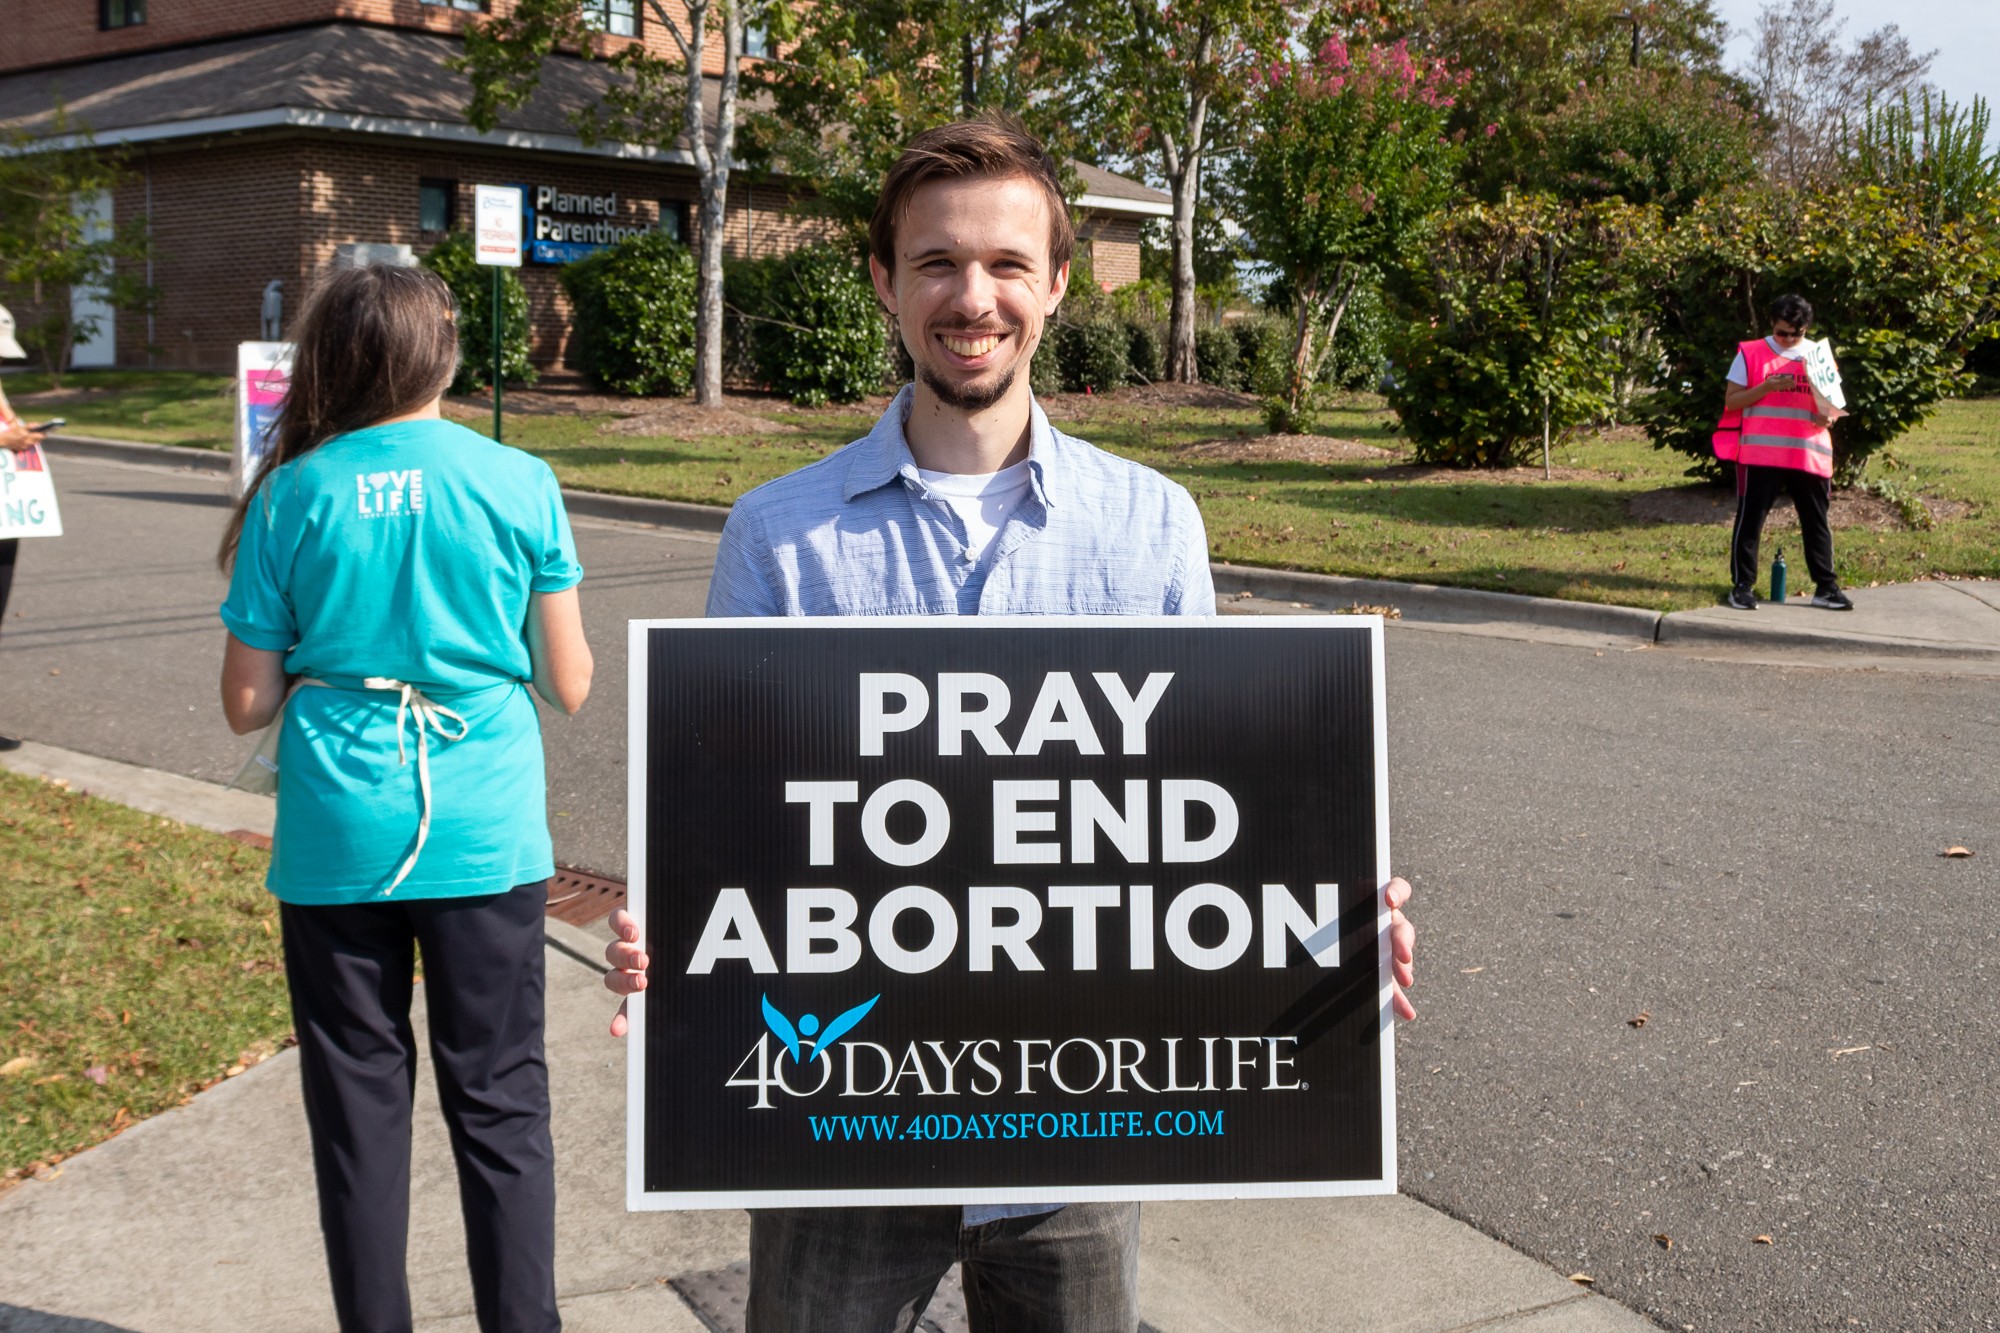 A protester stands outside Planned Parenthood in Chapel Hill. He is poses with his sign that reads “Pray to End Abortion. 40 Days for Life.” Other protestors are in the background.